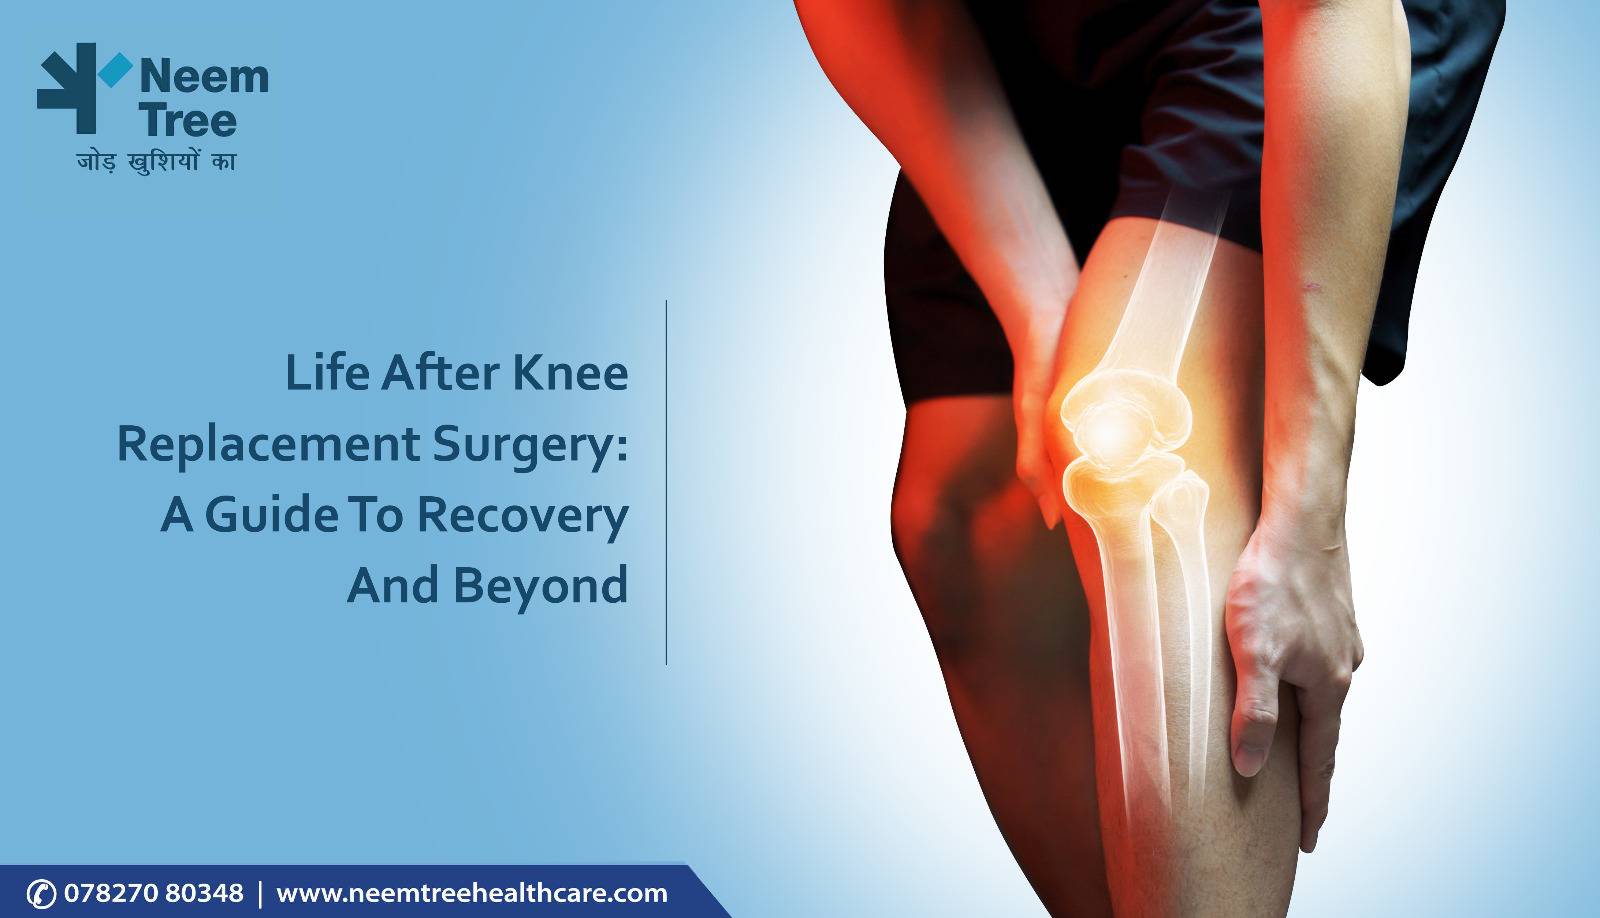 Life after Knee Replacement Surgery